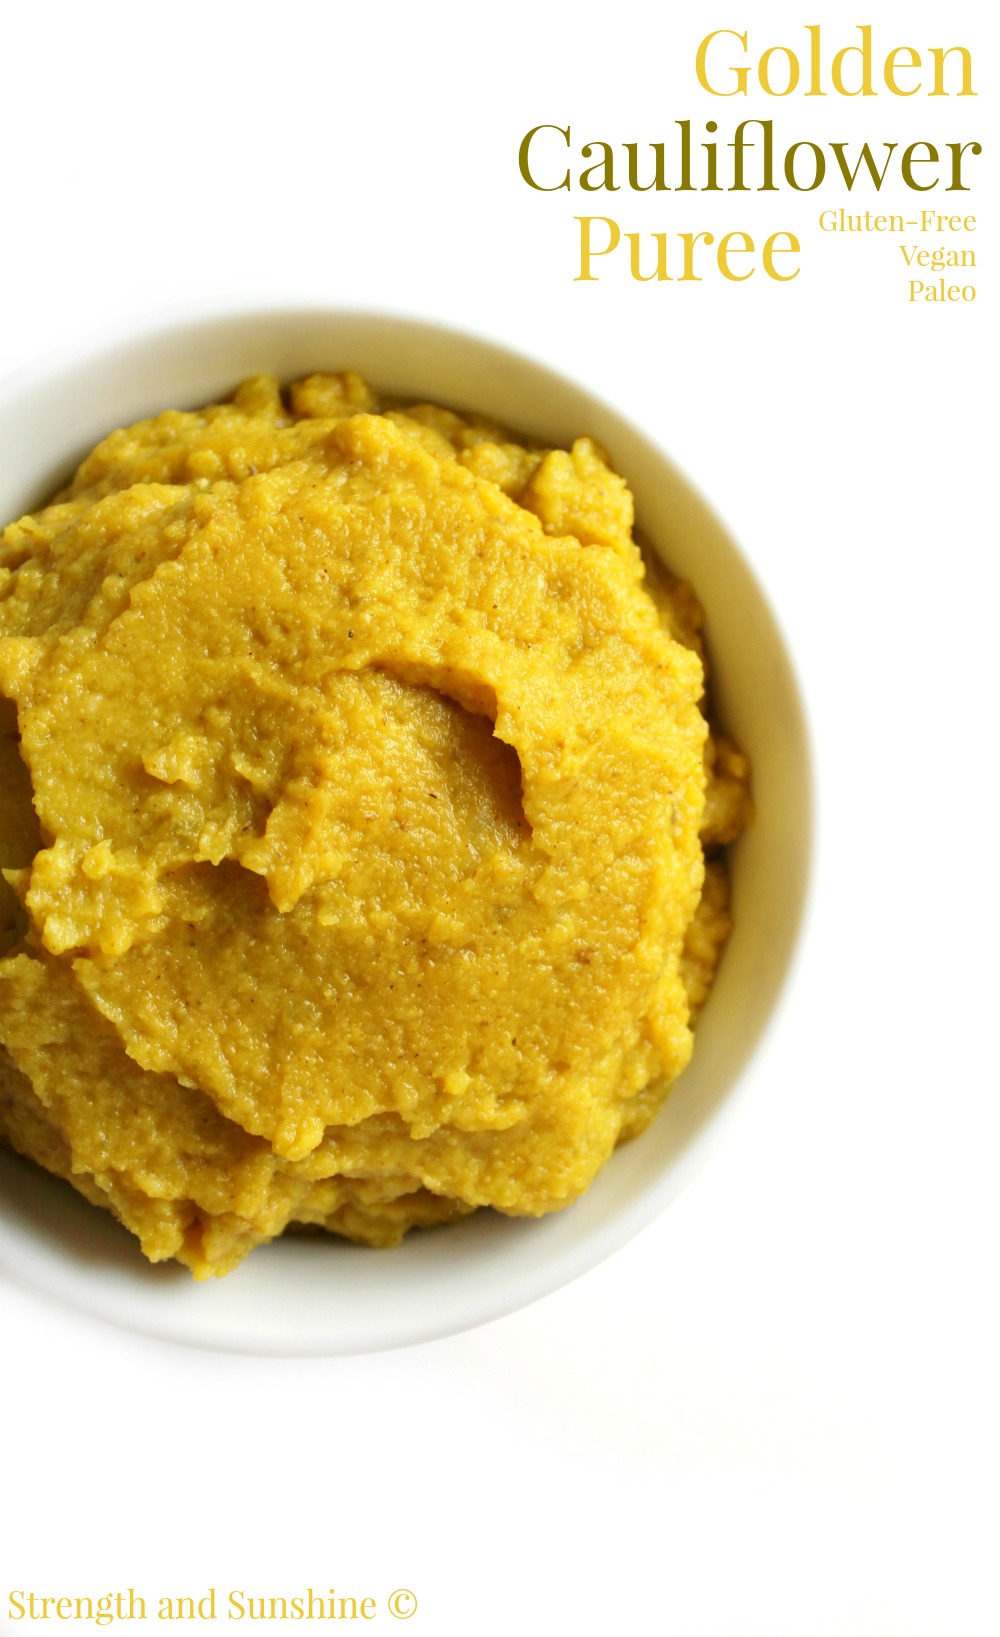 Golden Cauliflower Puree | Strength and Sunshine @RebeccaGF666 ﻿A simple golden cauliflower puree with golden beets, Indian spices, and coconut milk. A healing and nourishing side dish recipe for gluten-free, vegan, and paleo eaters alike.